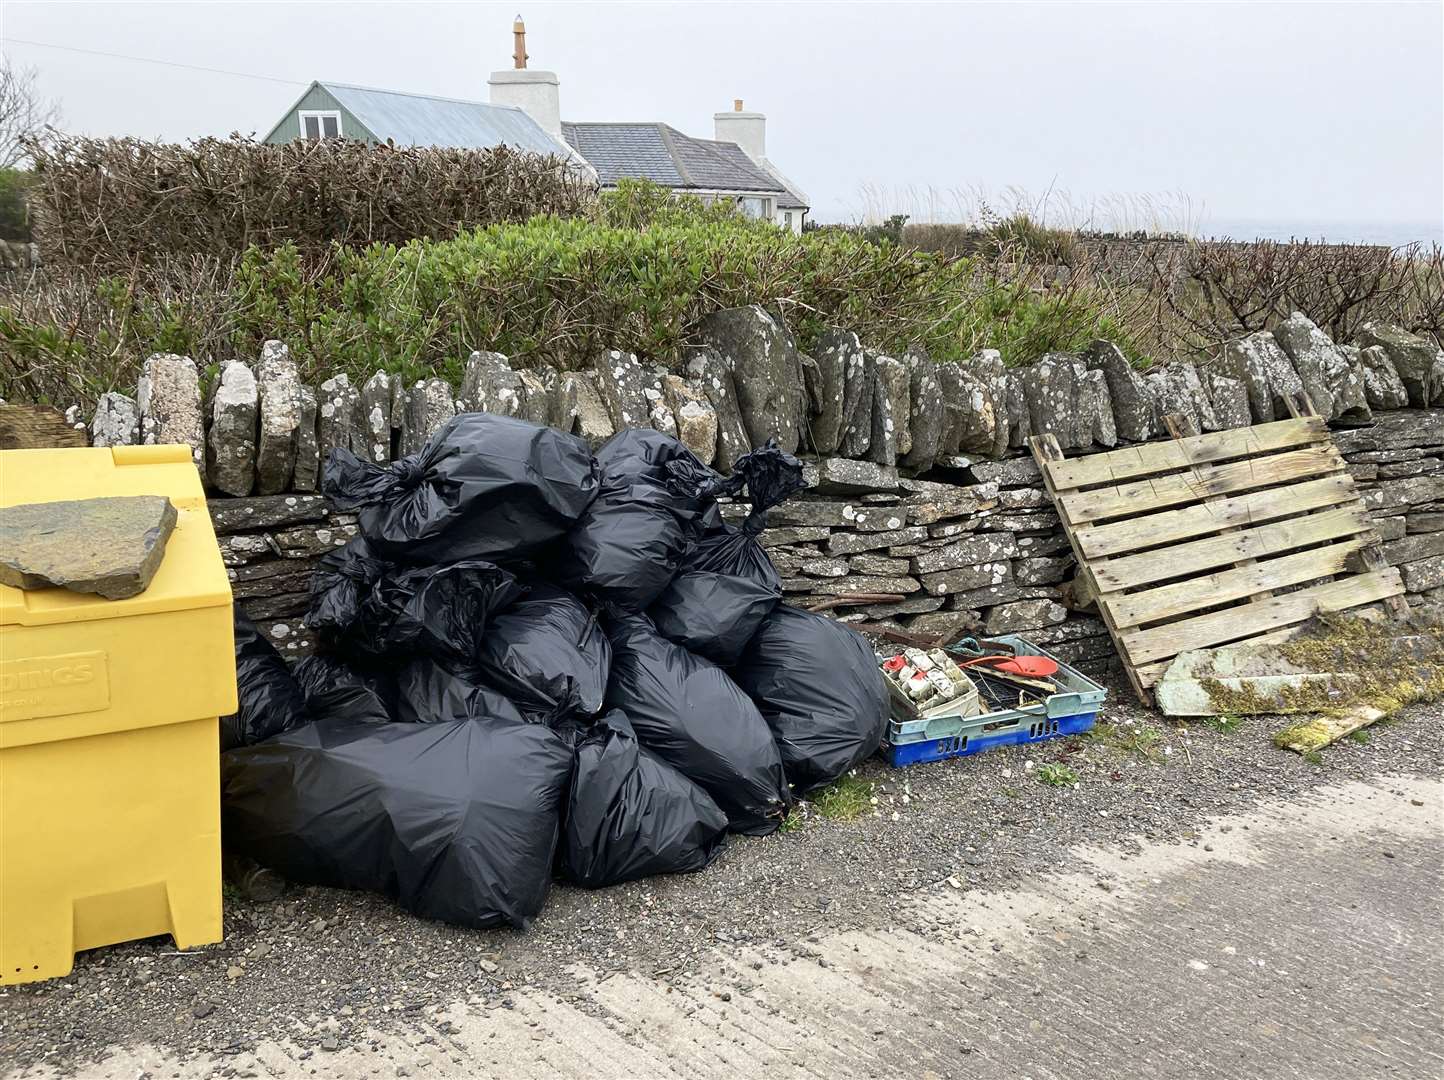 Beach-clean organisers were amazed at the amount of litter and debris they picked up.